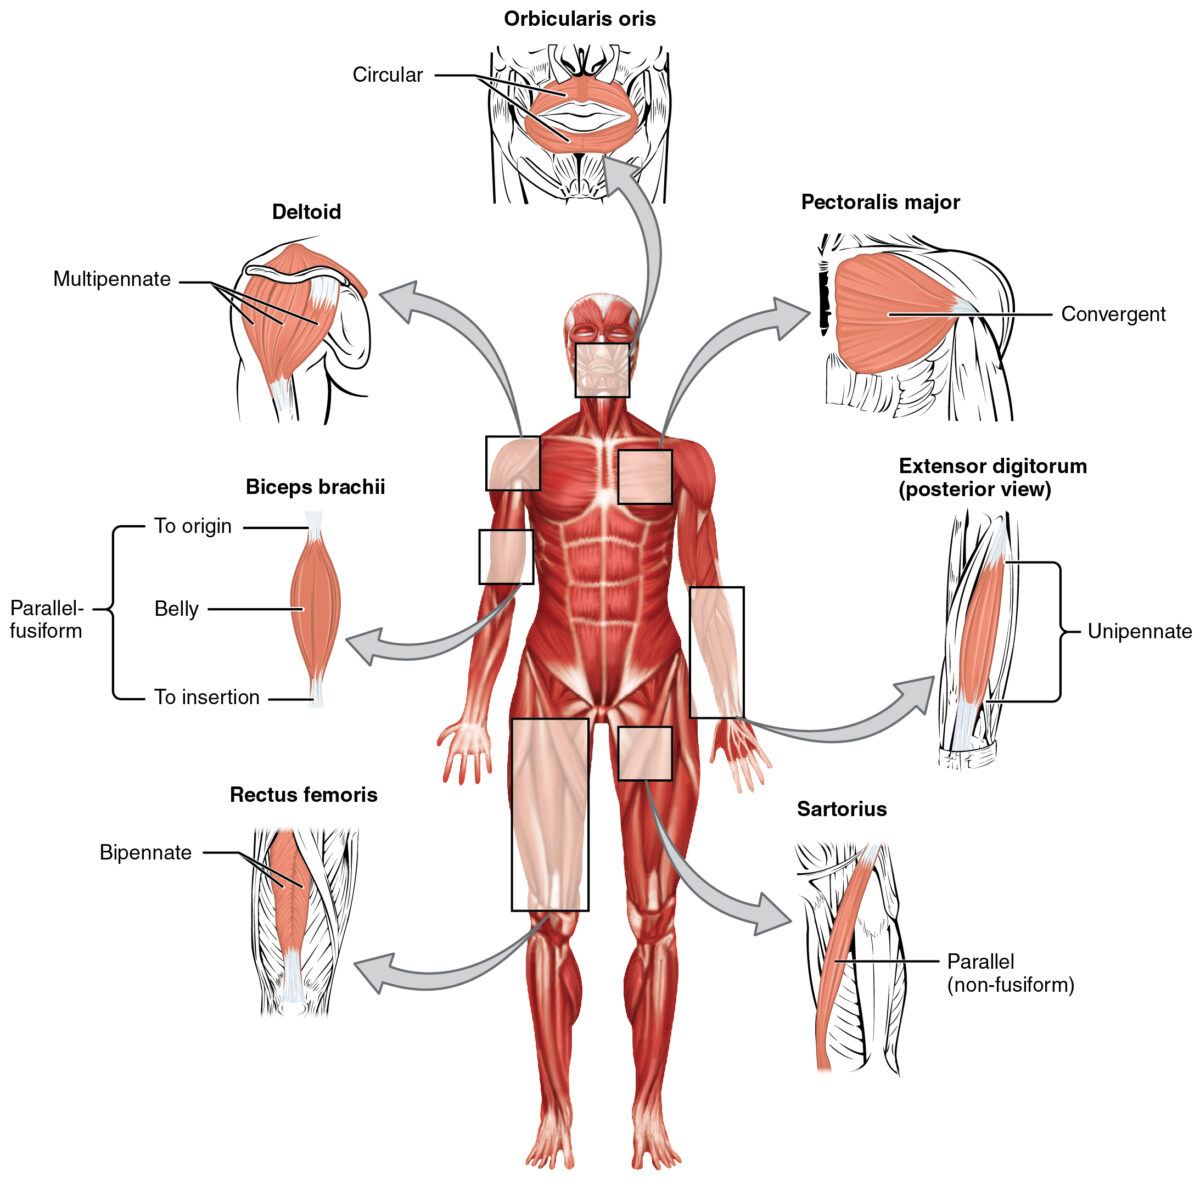 Types of organization within muscles